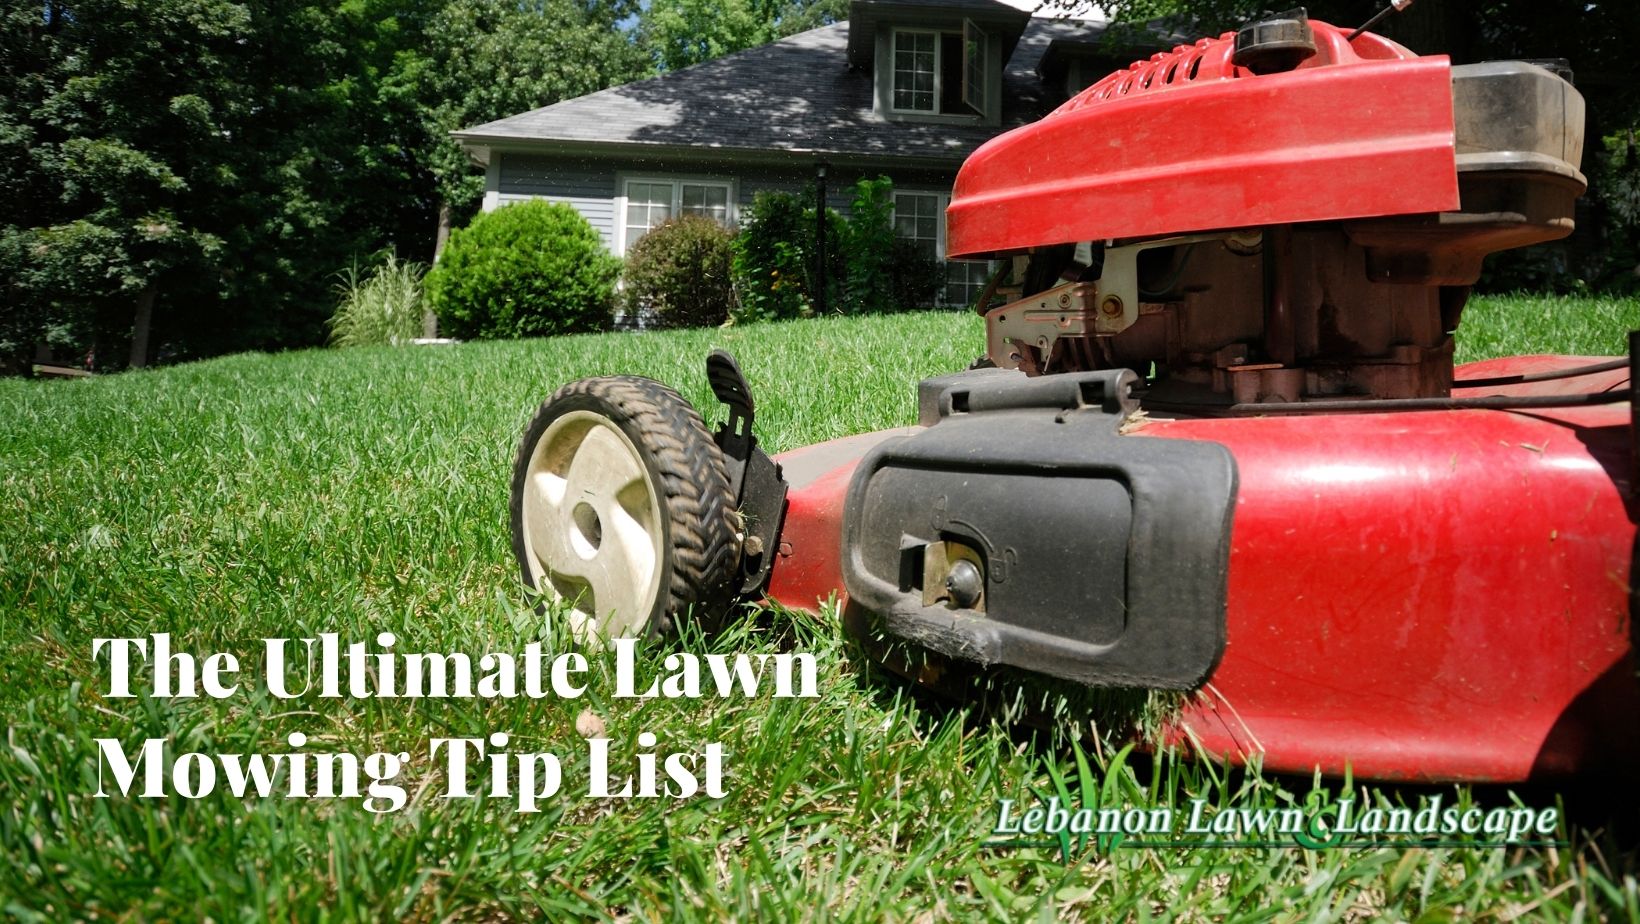 A lawn mower, moving the lawn